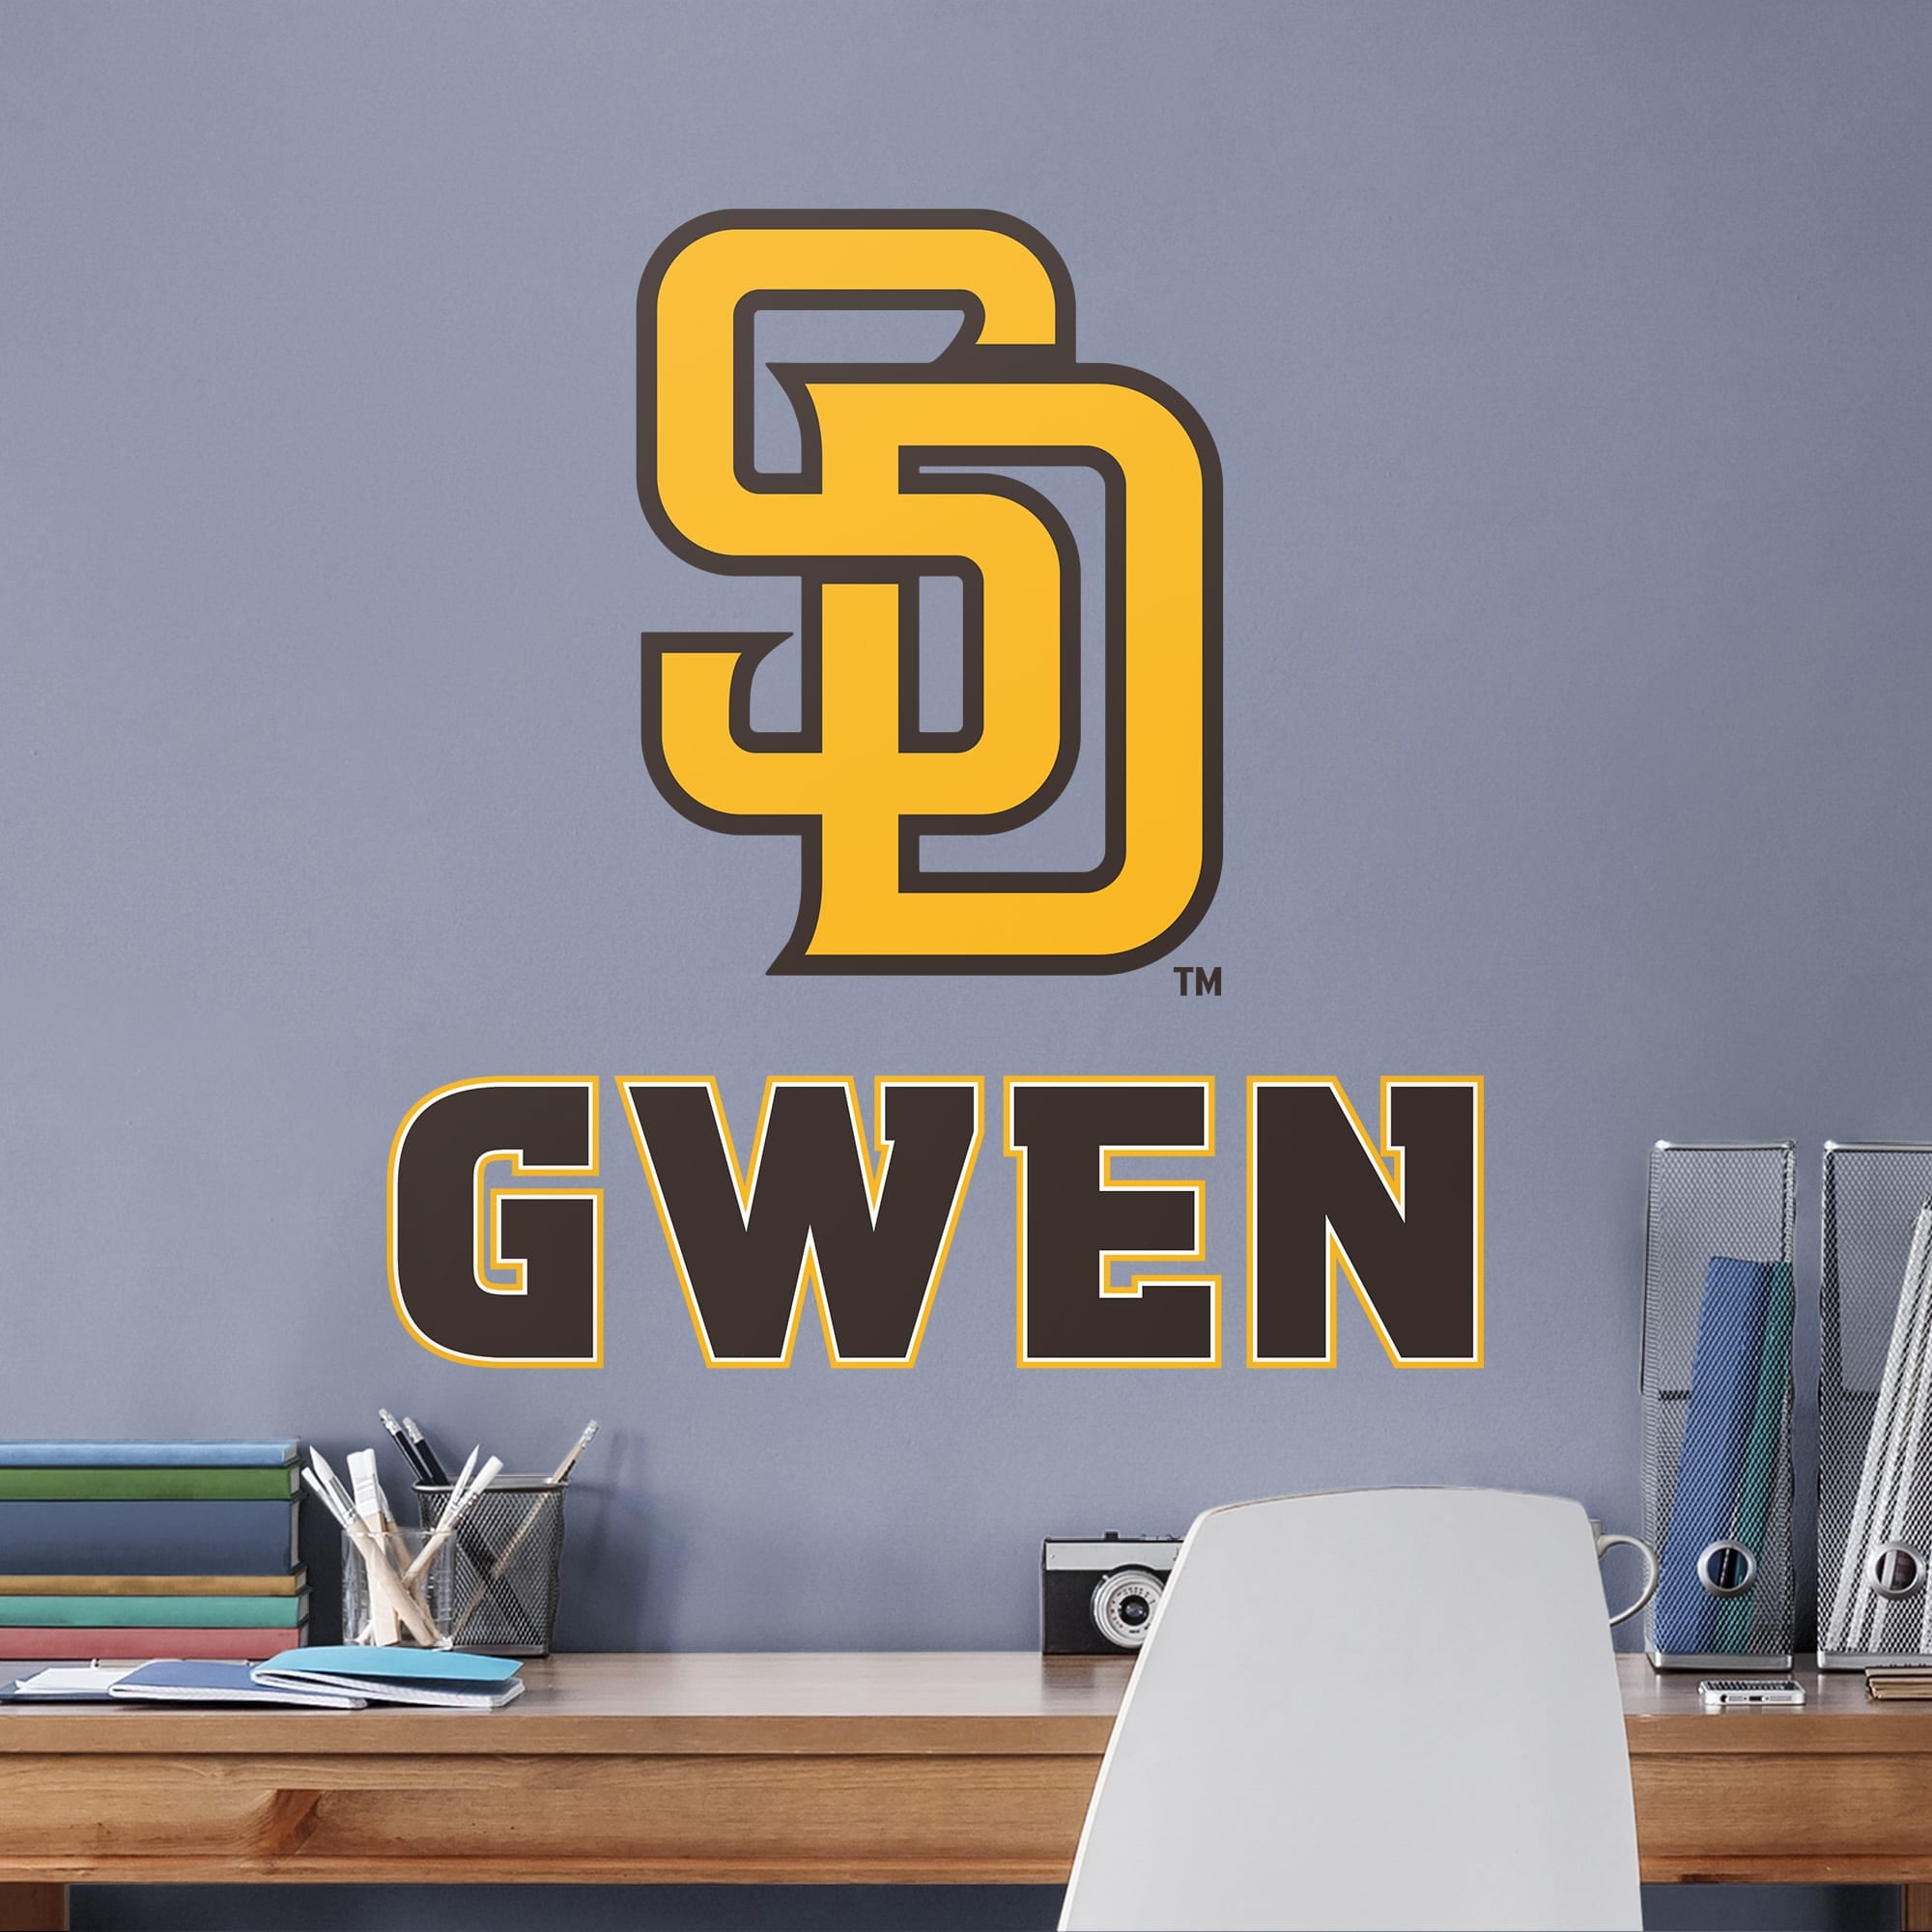 San Diego Padres: "SD" Stacked Personalized Name - Officially Licensed MLB Transfer Decal in Brown (52"W x 39.5"H) by Fathead |